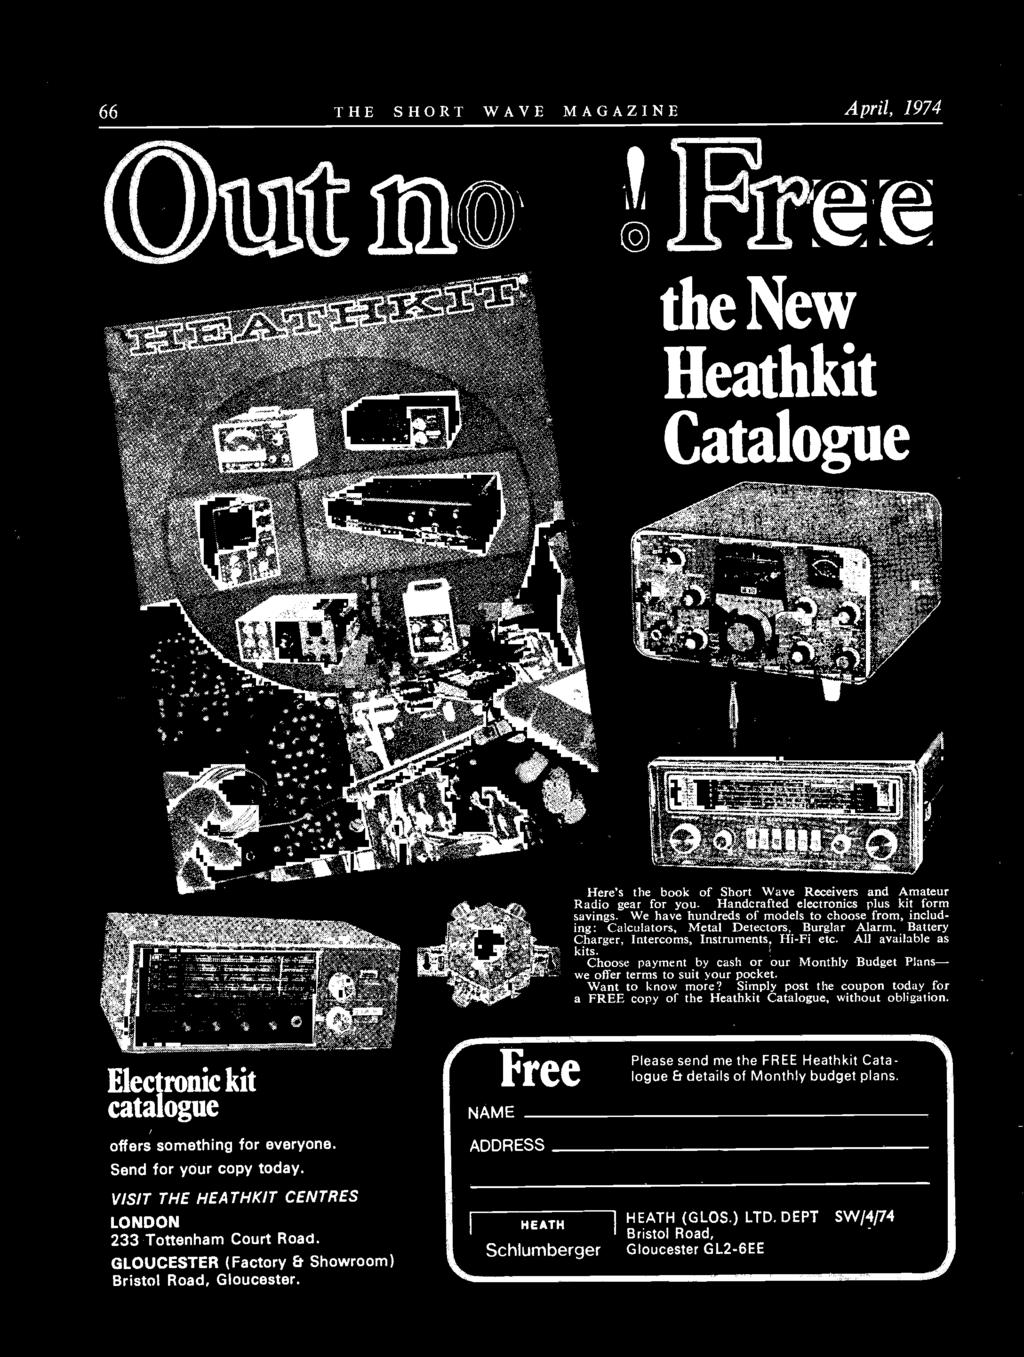 Simply post the coupon today for a FREE copy of the Heathkit Catalogue, without obligation. Electronic kit catalogue offers something for everyone.